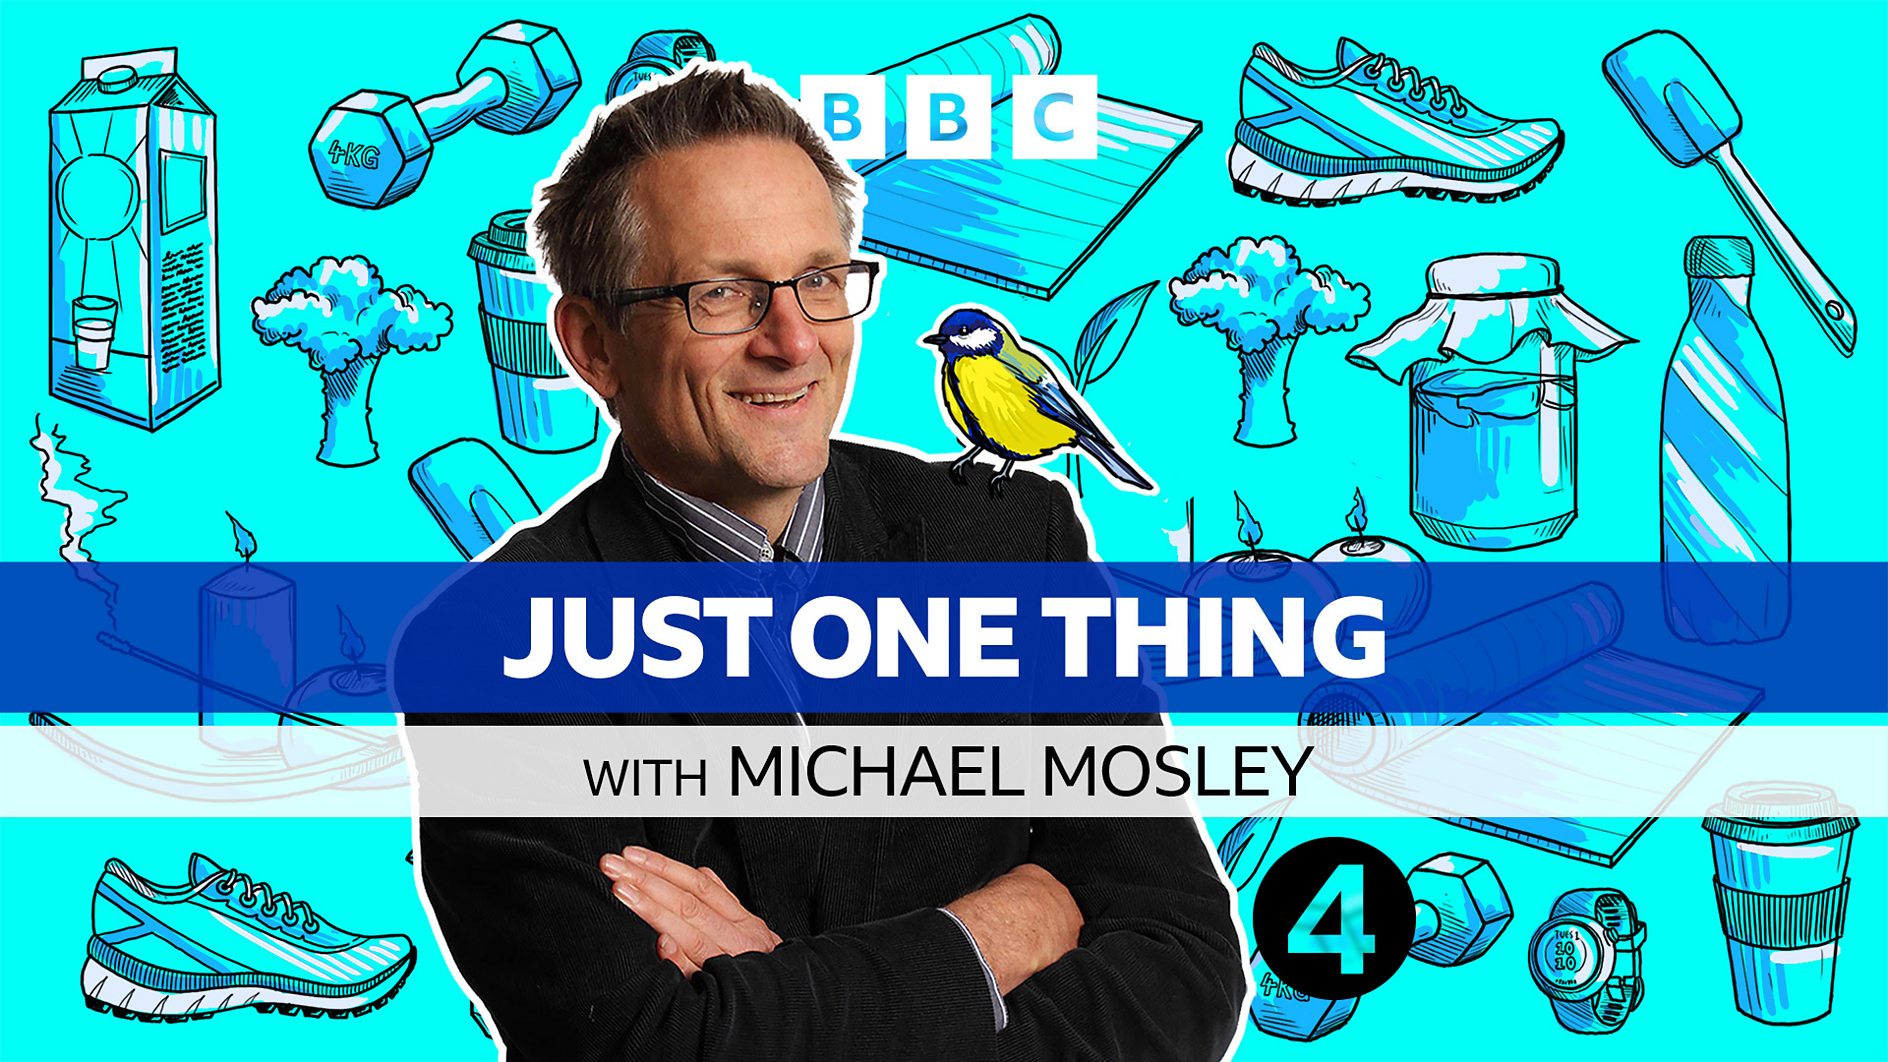 Radio 4 podcast Just One Thing – with Michael Mosley commissioned for BBC Two and iPlayer